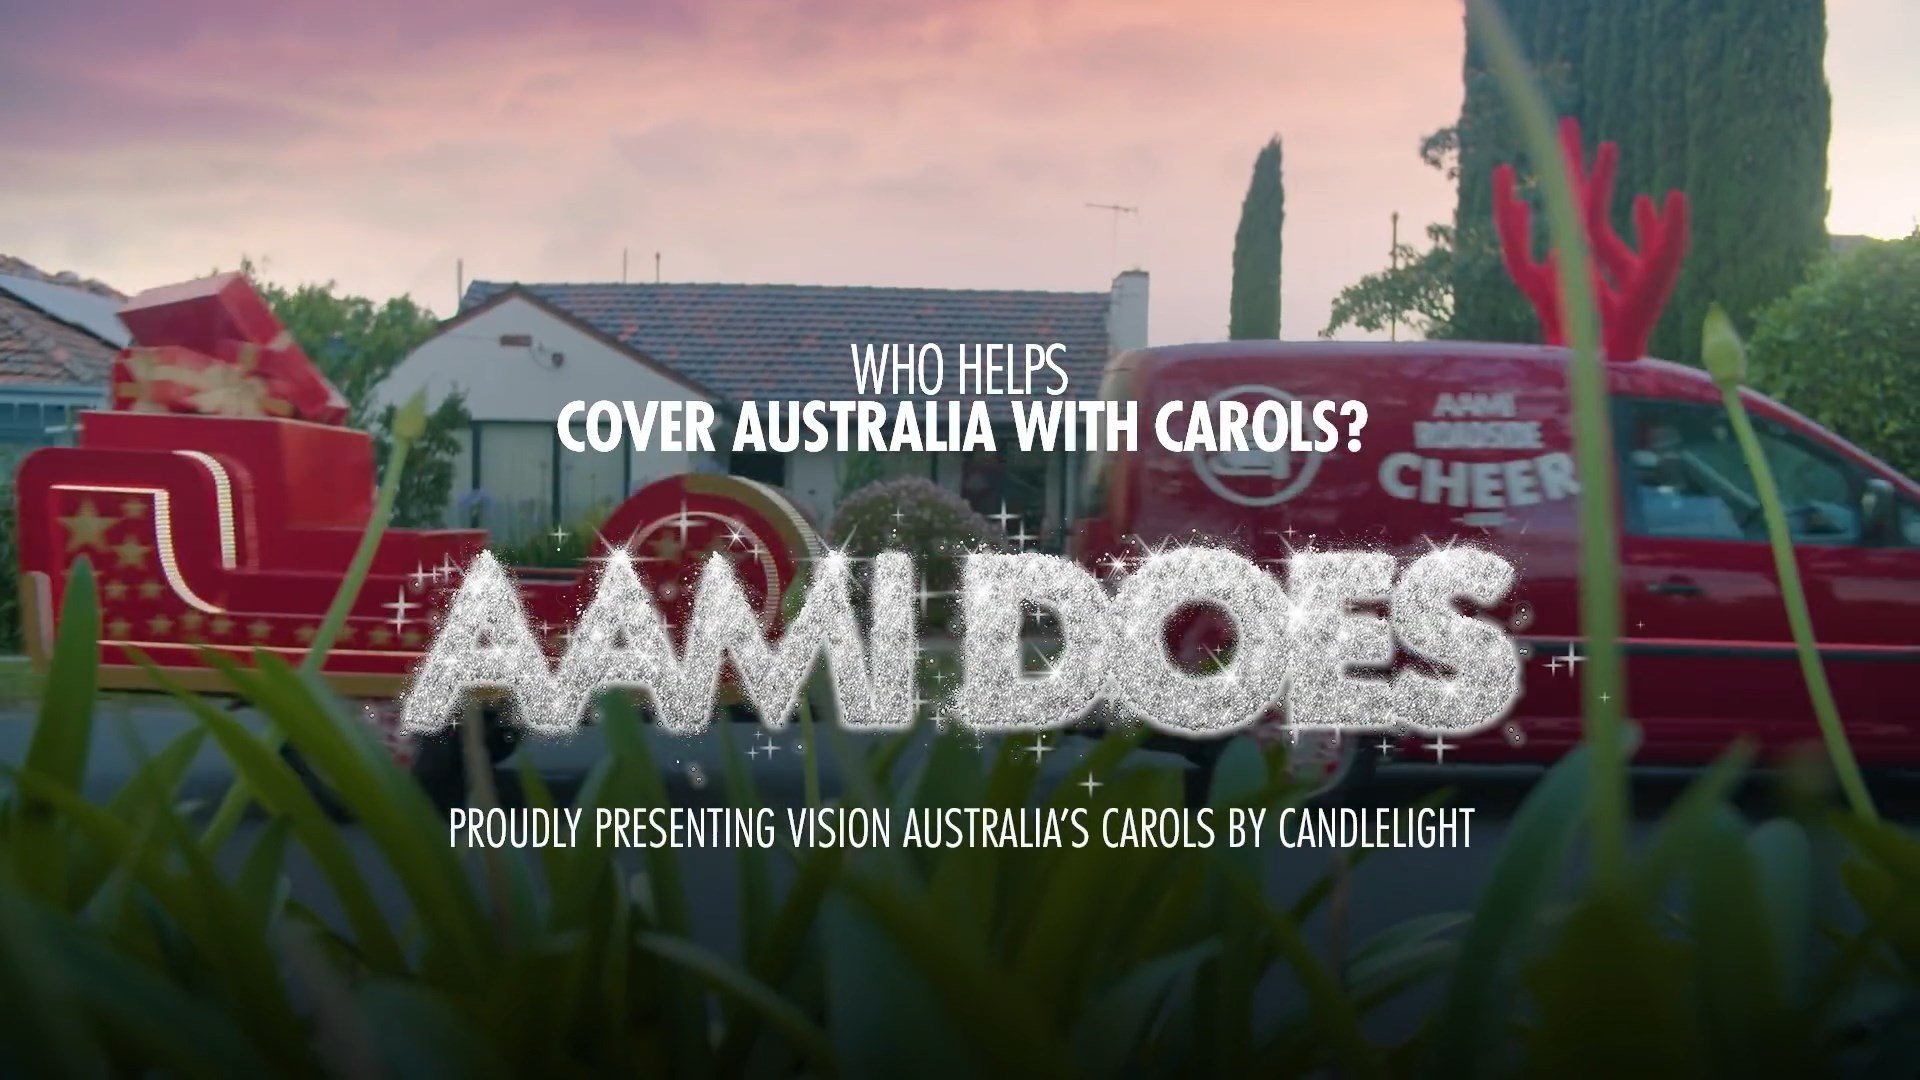 y2mate.com - AAMI covers the community with carols_1080p.mp4.webm_snapshot_00.29.607.jpg